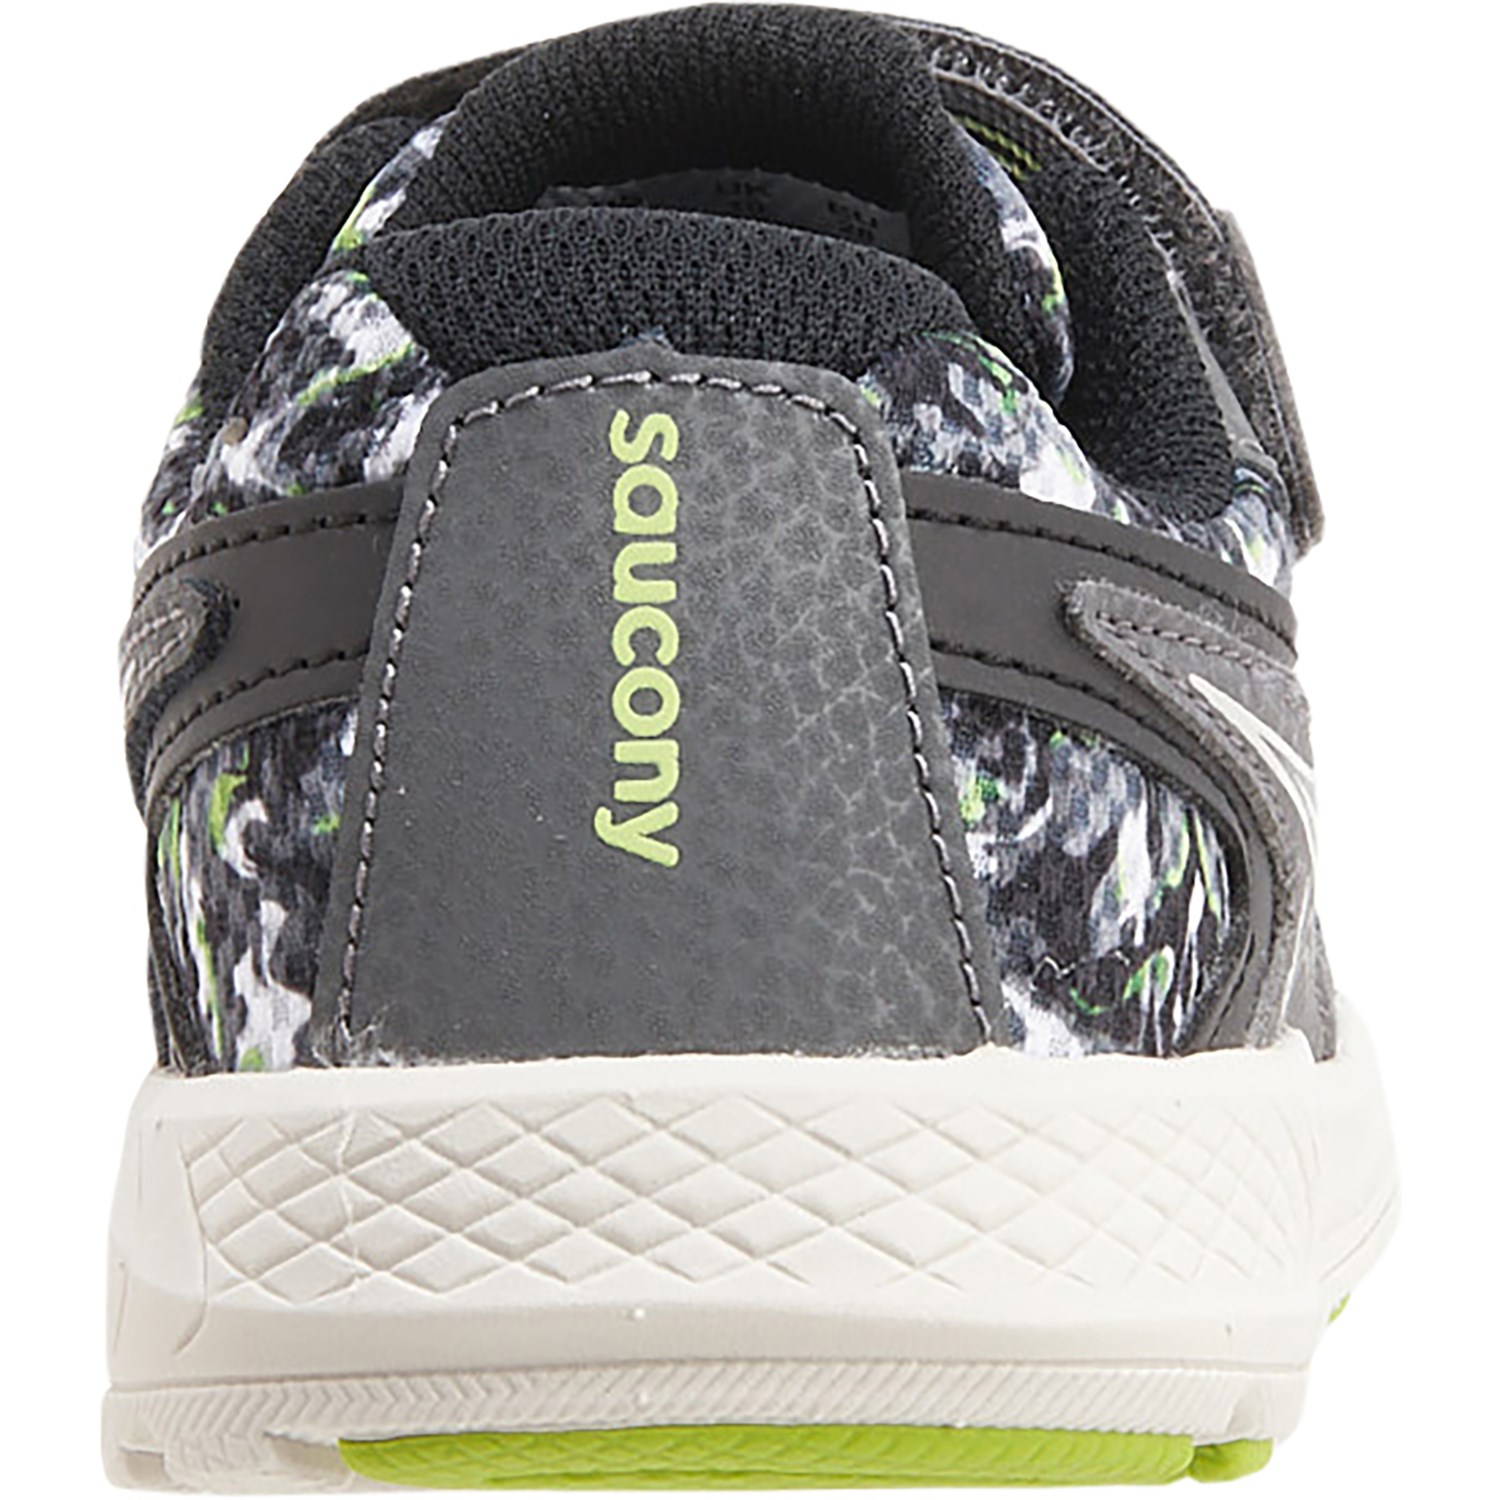 Saucony Ride 10 Jr. Running Shoes (For Boys) - Save 30%